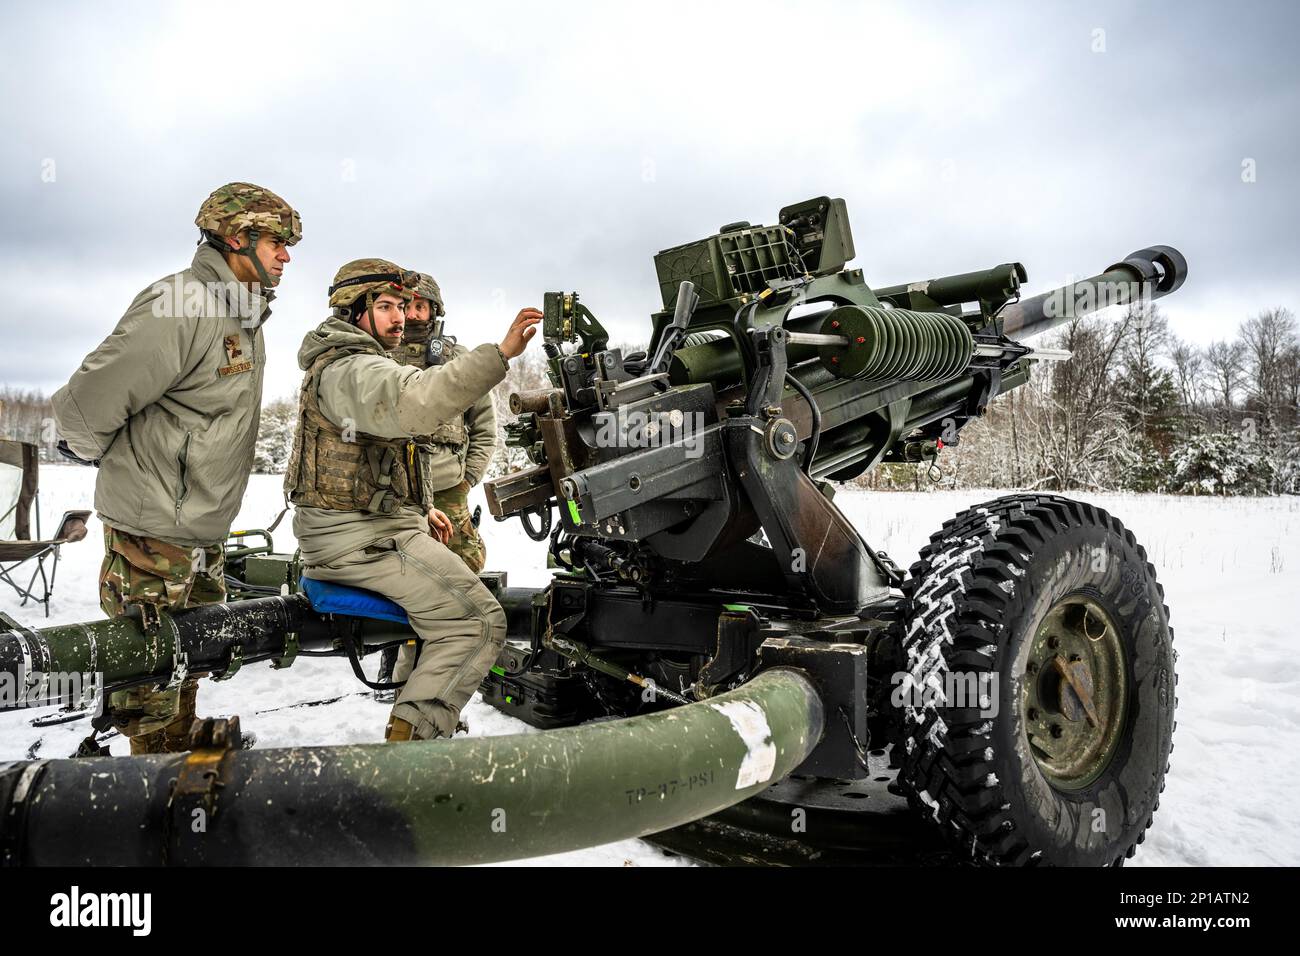 Army Cpl. Anthony Mischo, 1-120th Field Artillery Regiment, demonstrates to Air Force Lt. Gen. Marc Sasseville, Vice Chief of the National Guard Bureau, the capabilities of the M119 howitzer during Northern Strike 23-1, Jan. 23, 2023, at Camp Grayling, Mich. Units that participate in Northern Strike’s winter iteration build readiness by conducting joint, cold-weather training designed to meet objectives of the Department of Defense’s Arctic Strategy. Stock Photo